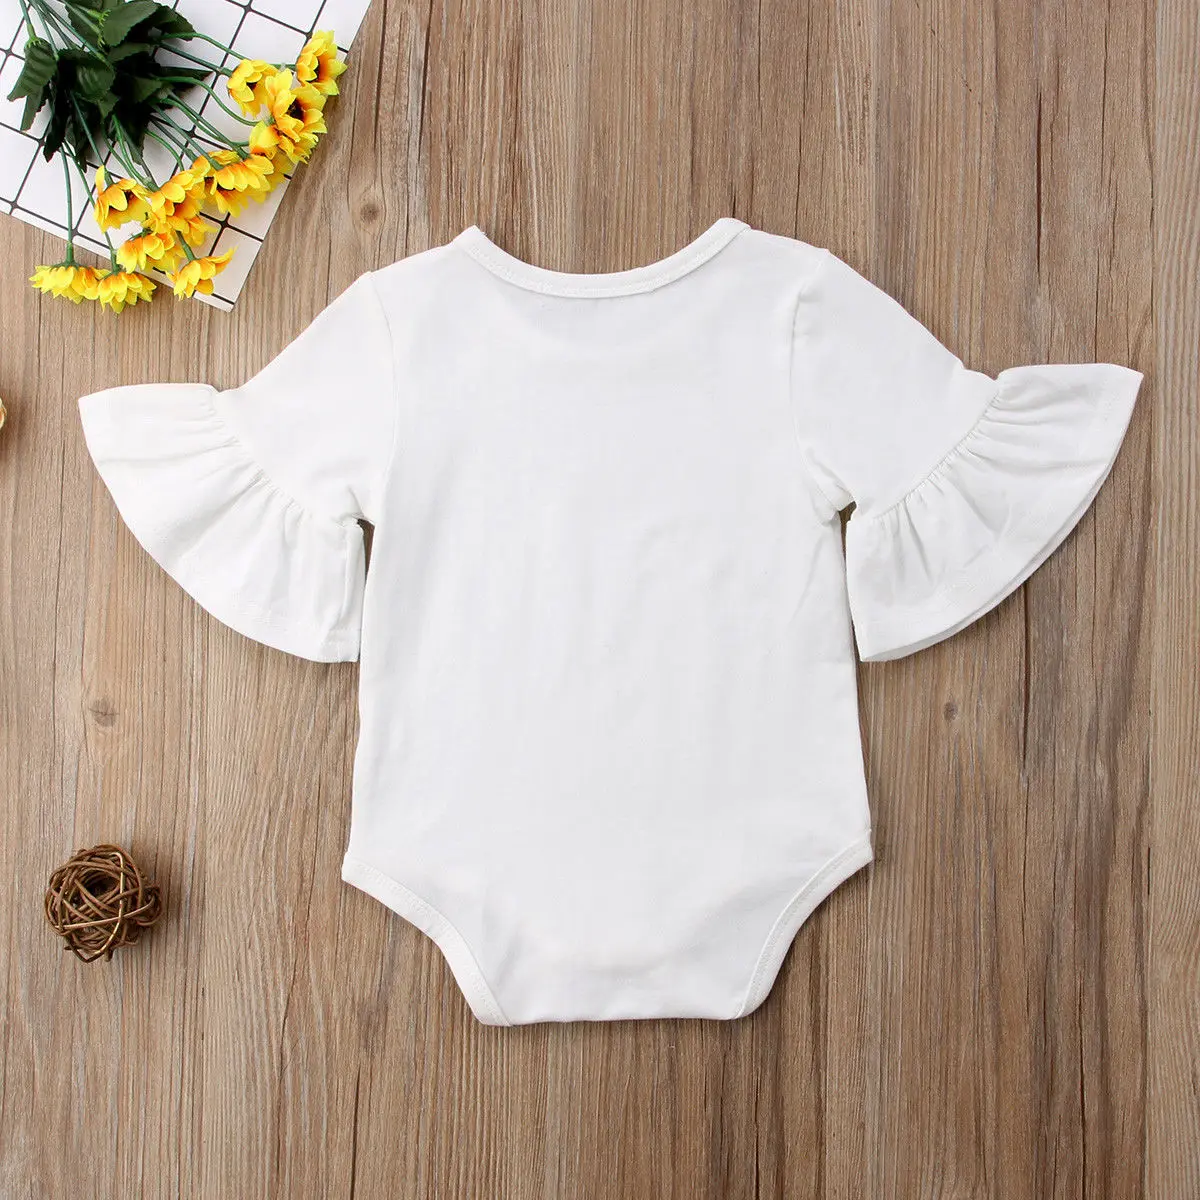 HTB1skdkMYPpK1RjSZFFq6y5PpXap 3 Color Newborn Infant Baby Girl Clothes Flared Sleeve Romper Brife Jumpsuit Sunsuit Outfits